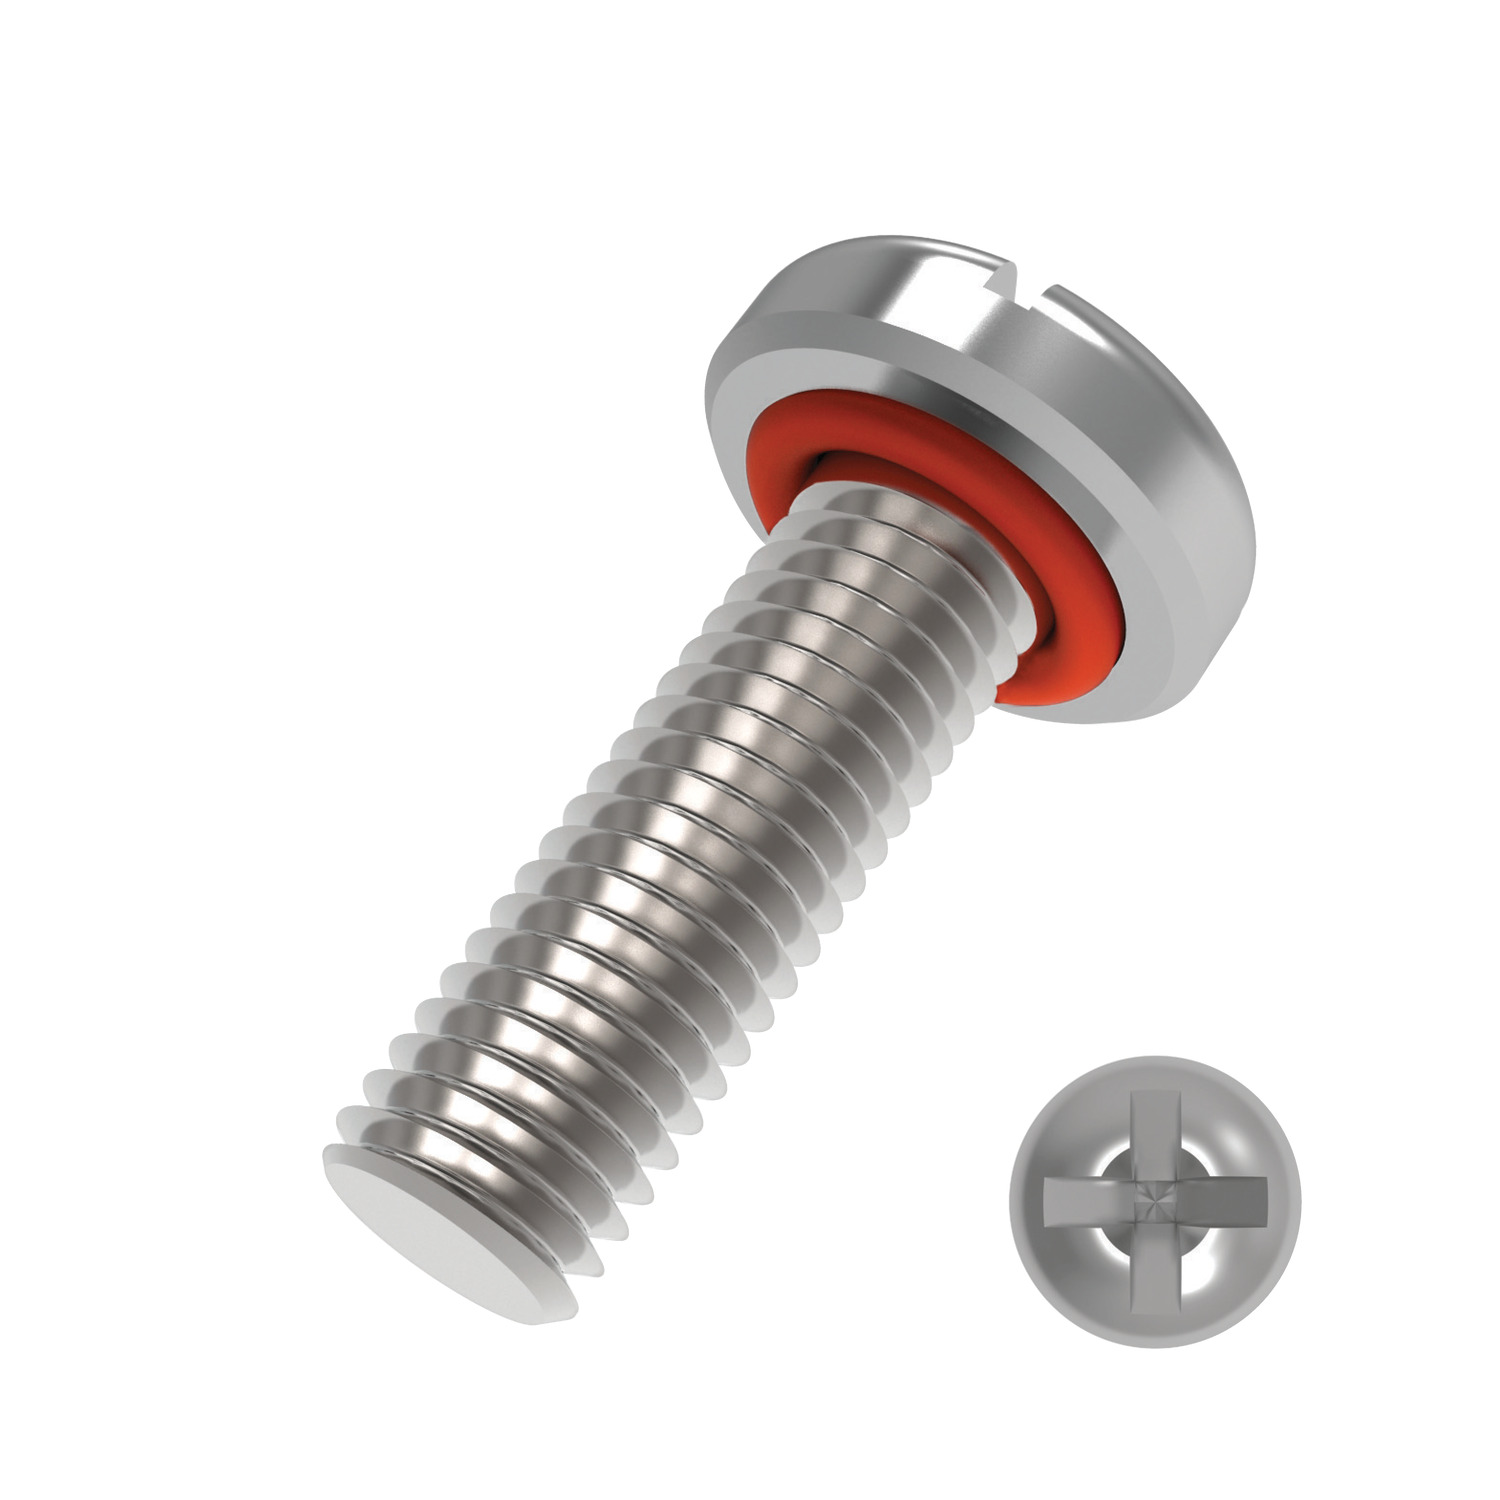 Pan Head Seal Screws Pan head. Integral sealing screws feature an O-ring underneath the screw to provide bi-direction sealing. This makes them ideal for protection against contaminates such as a dirt.